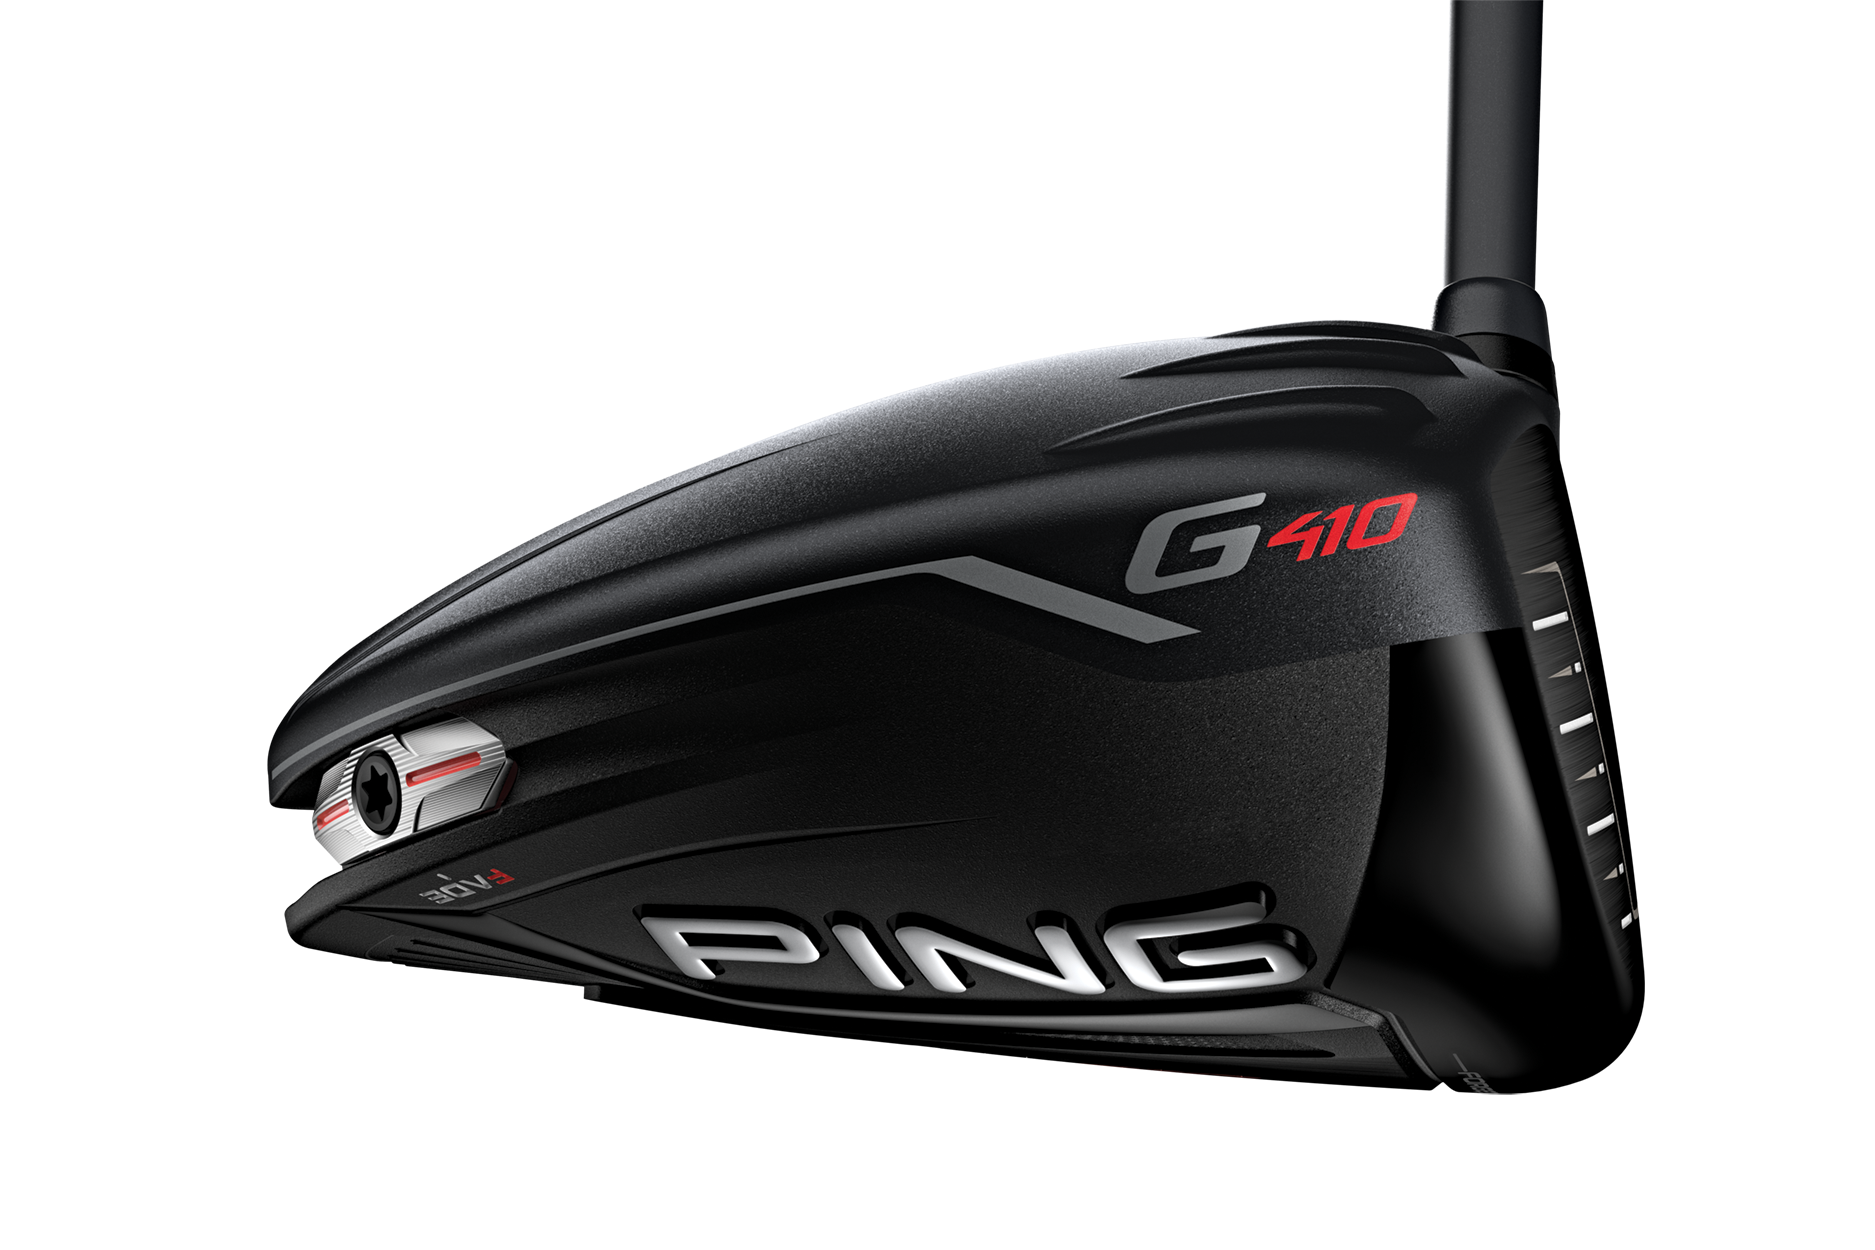 Ping G410 LST driver review